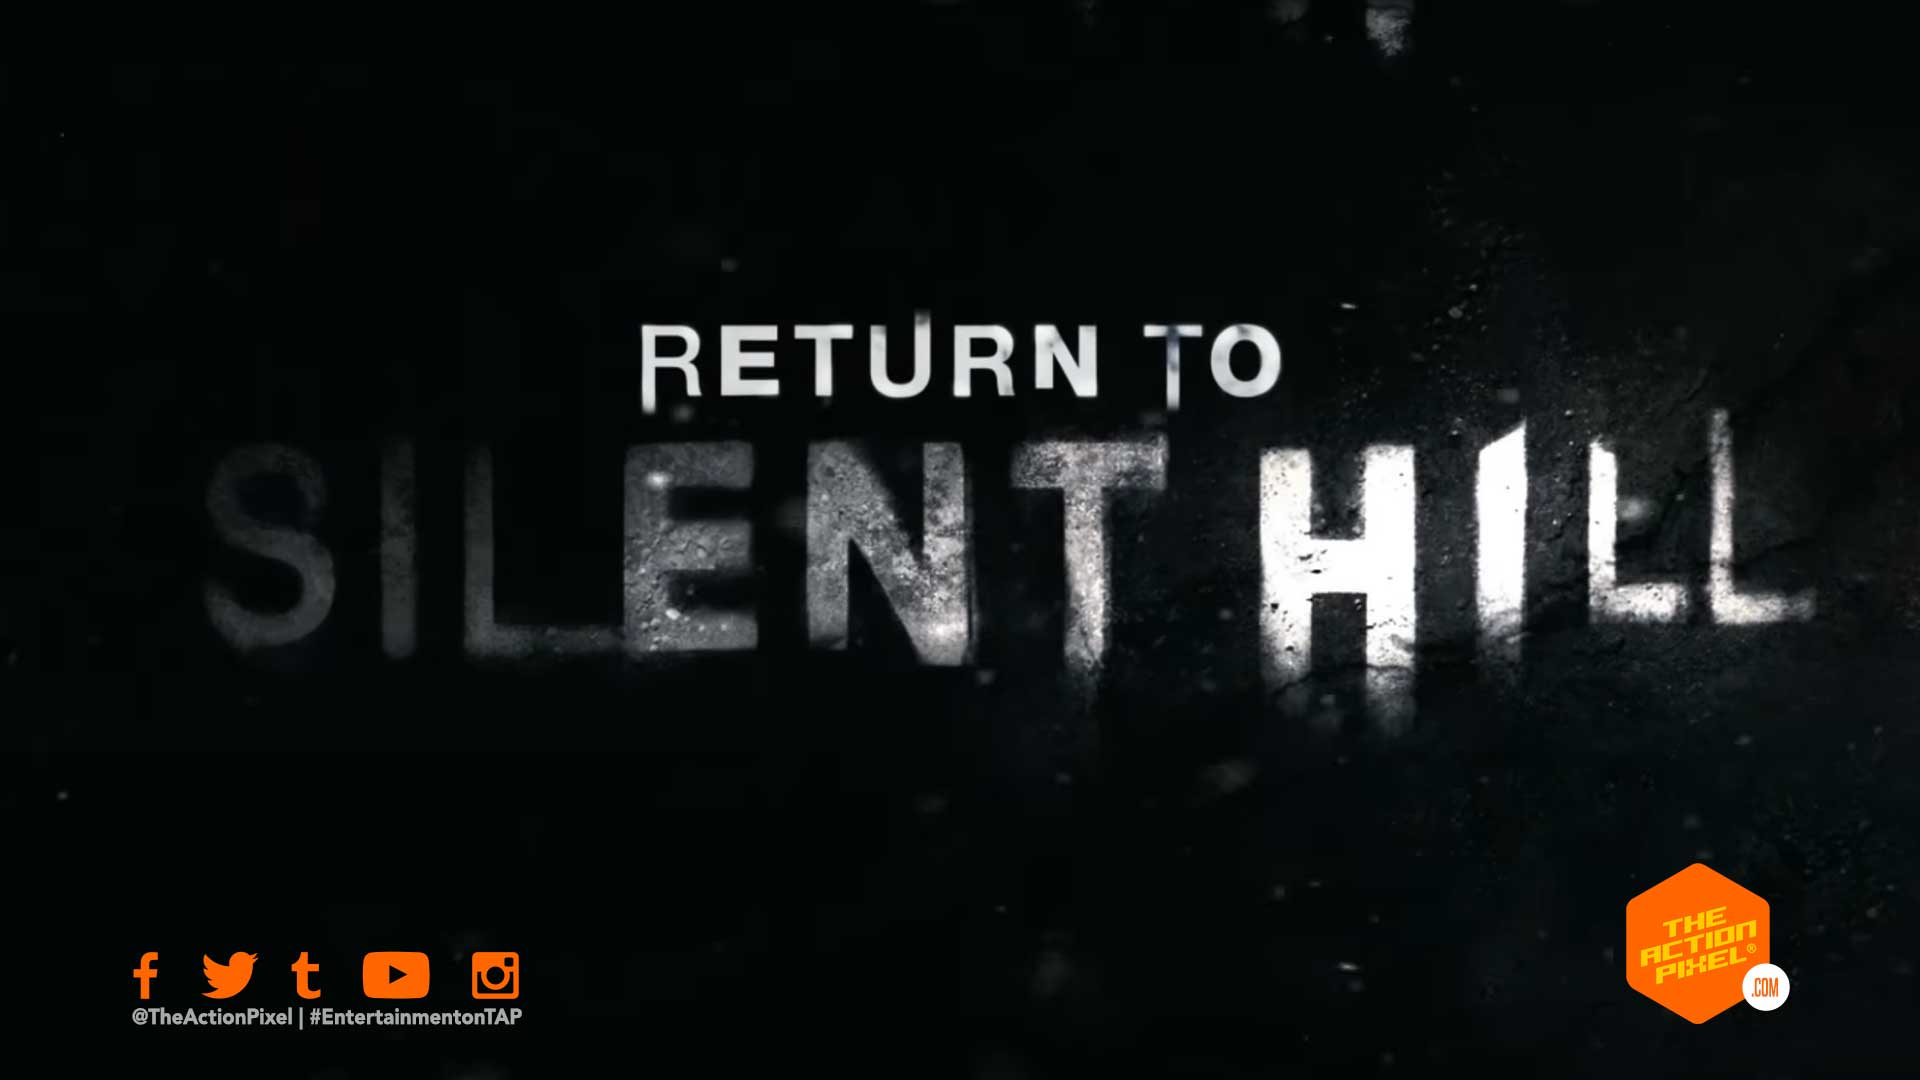 return to silent hill, konami, silent hill, the action pixel, entertainment on tap, Jeremy Irvine, Hannah Emily Anderson, featured,